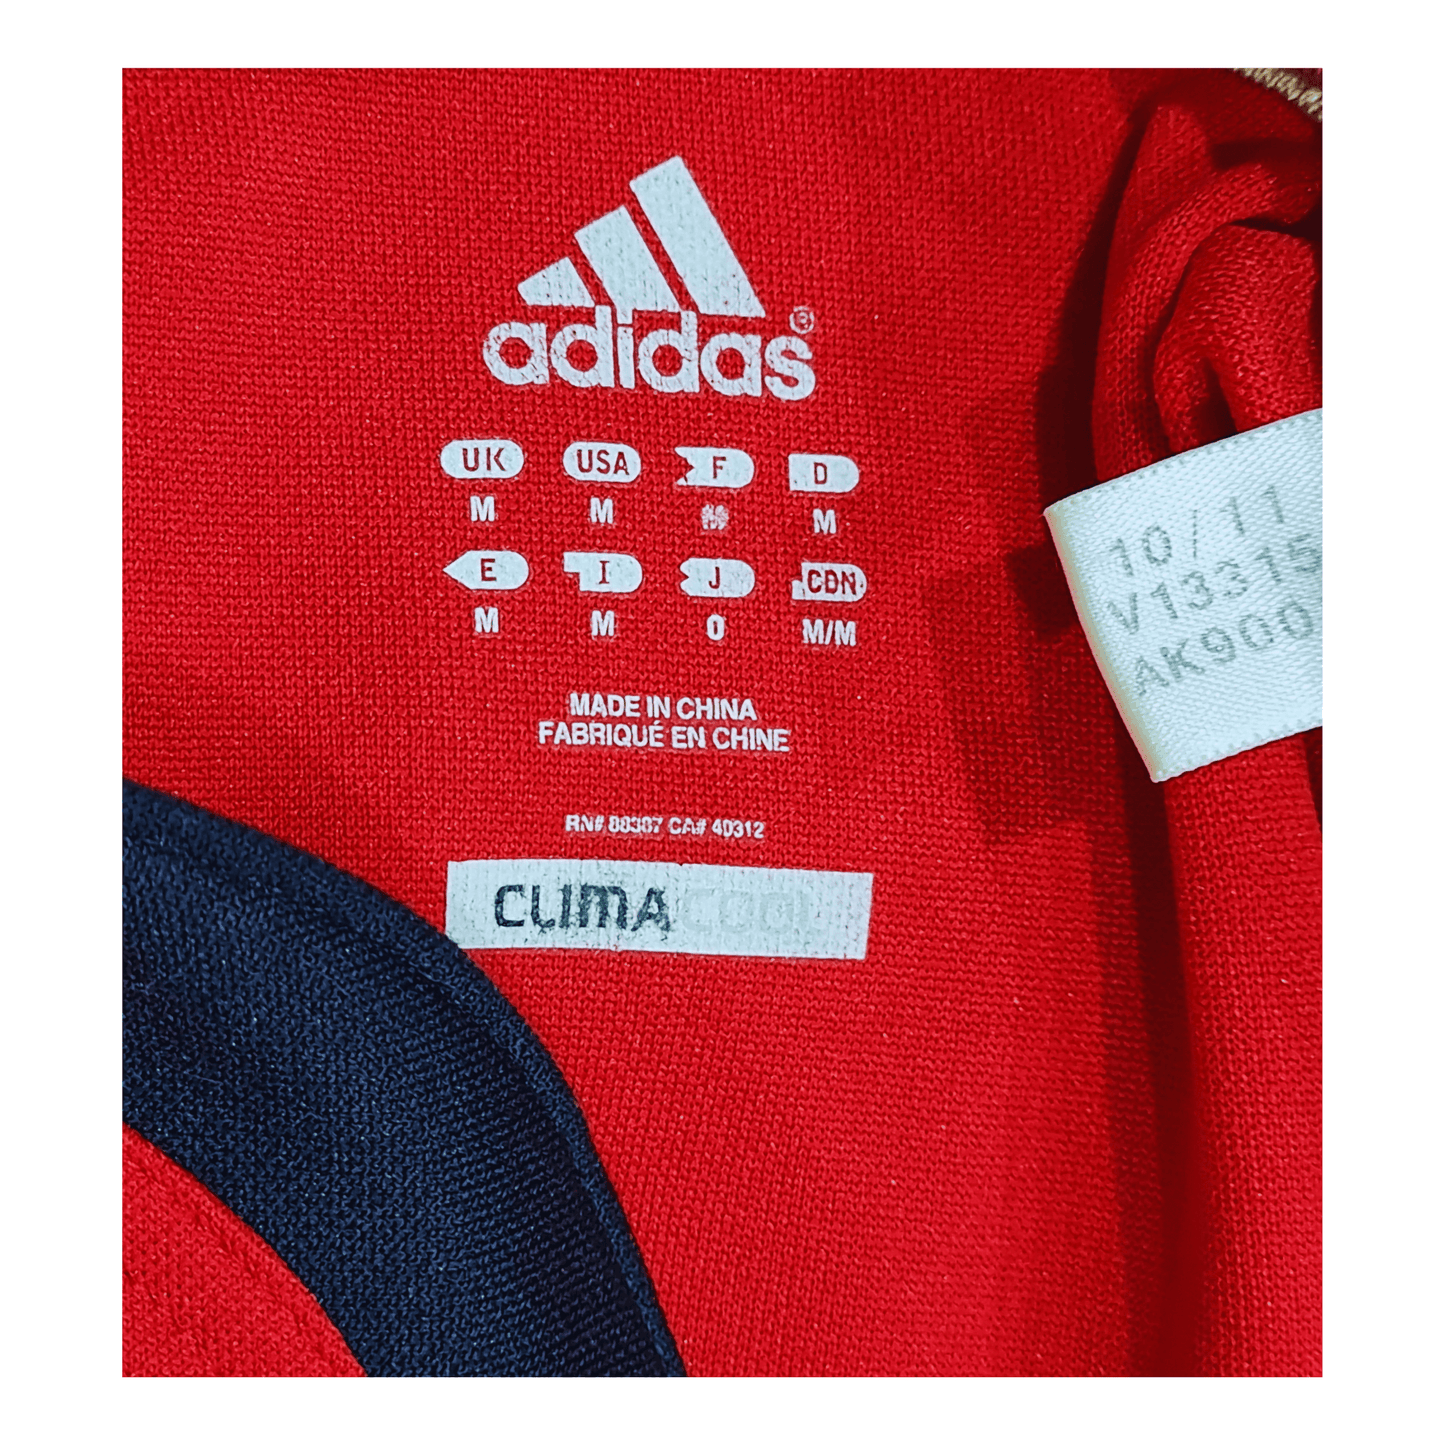 A red Adidas Munster 2011/12 Home Jersey with a label on it.